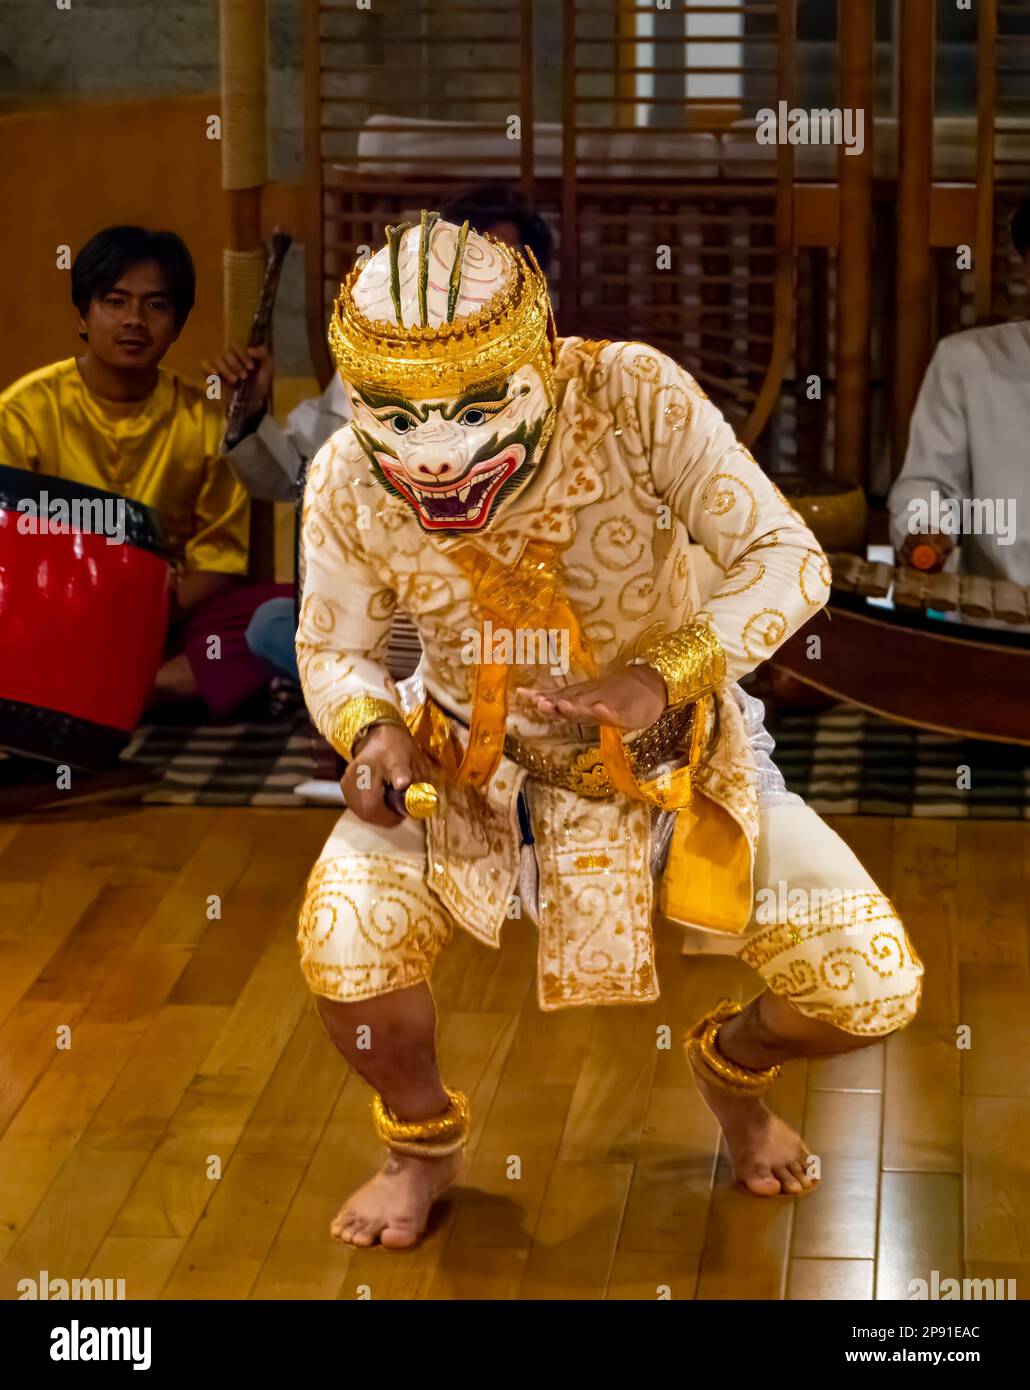 A traditional Khmer dancer in Cambodia performs on a river cruise ship moored in the capital Phnom Penh. Stock Photo